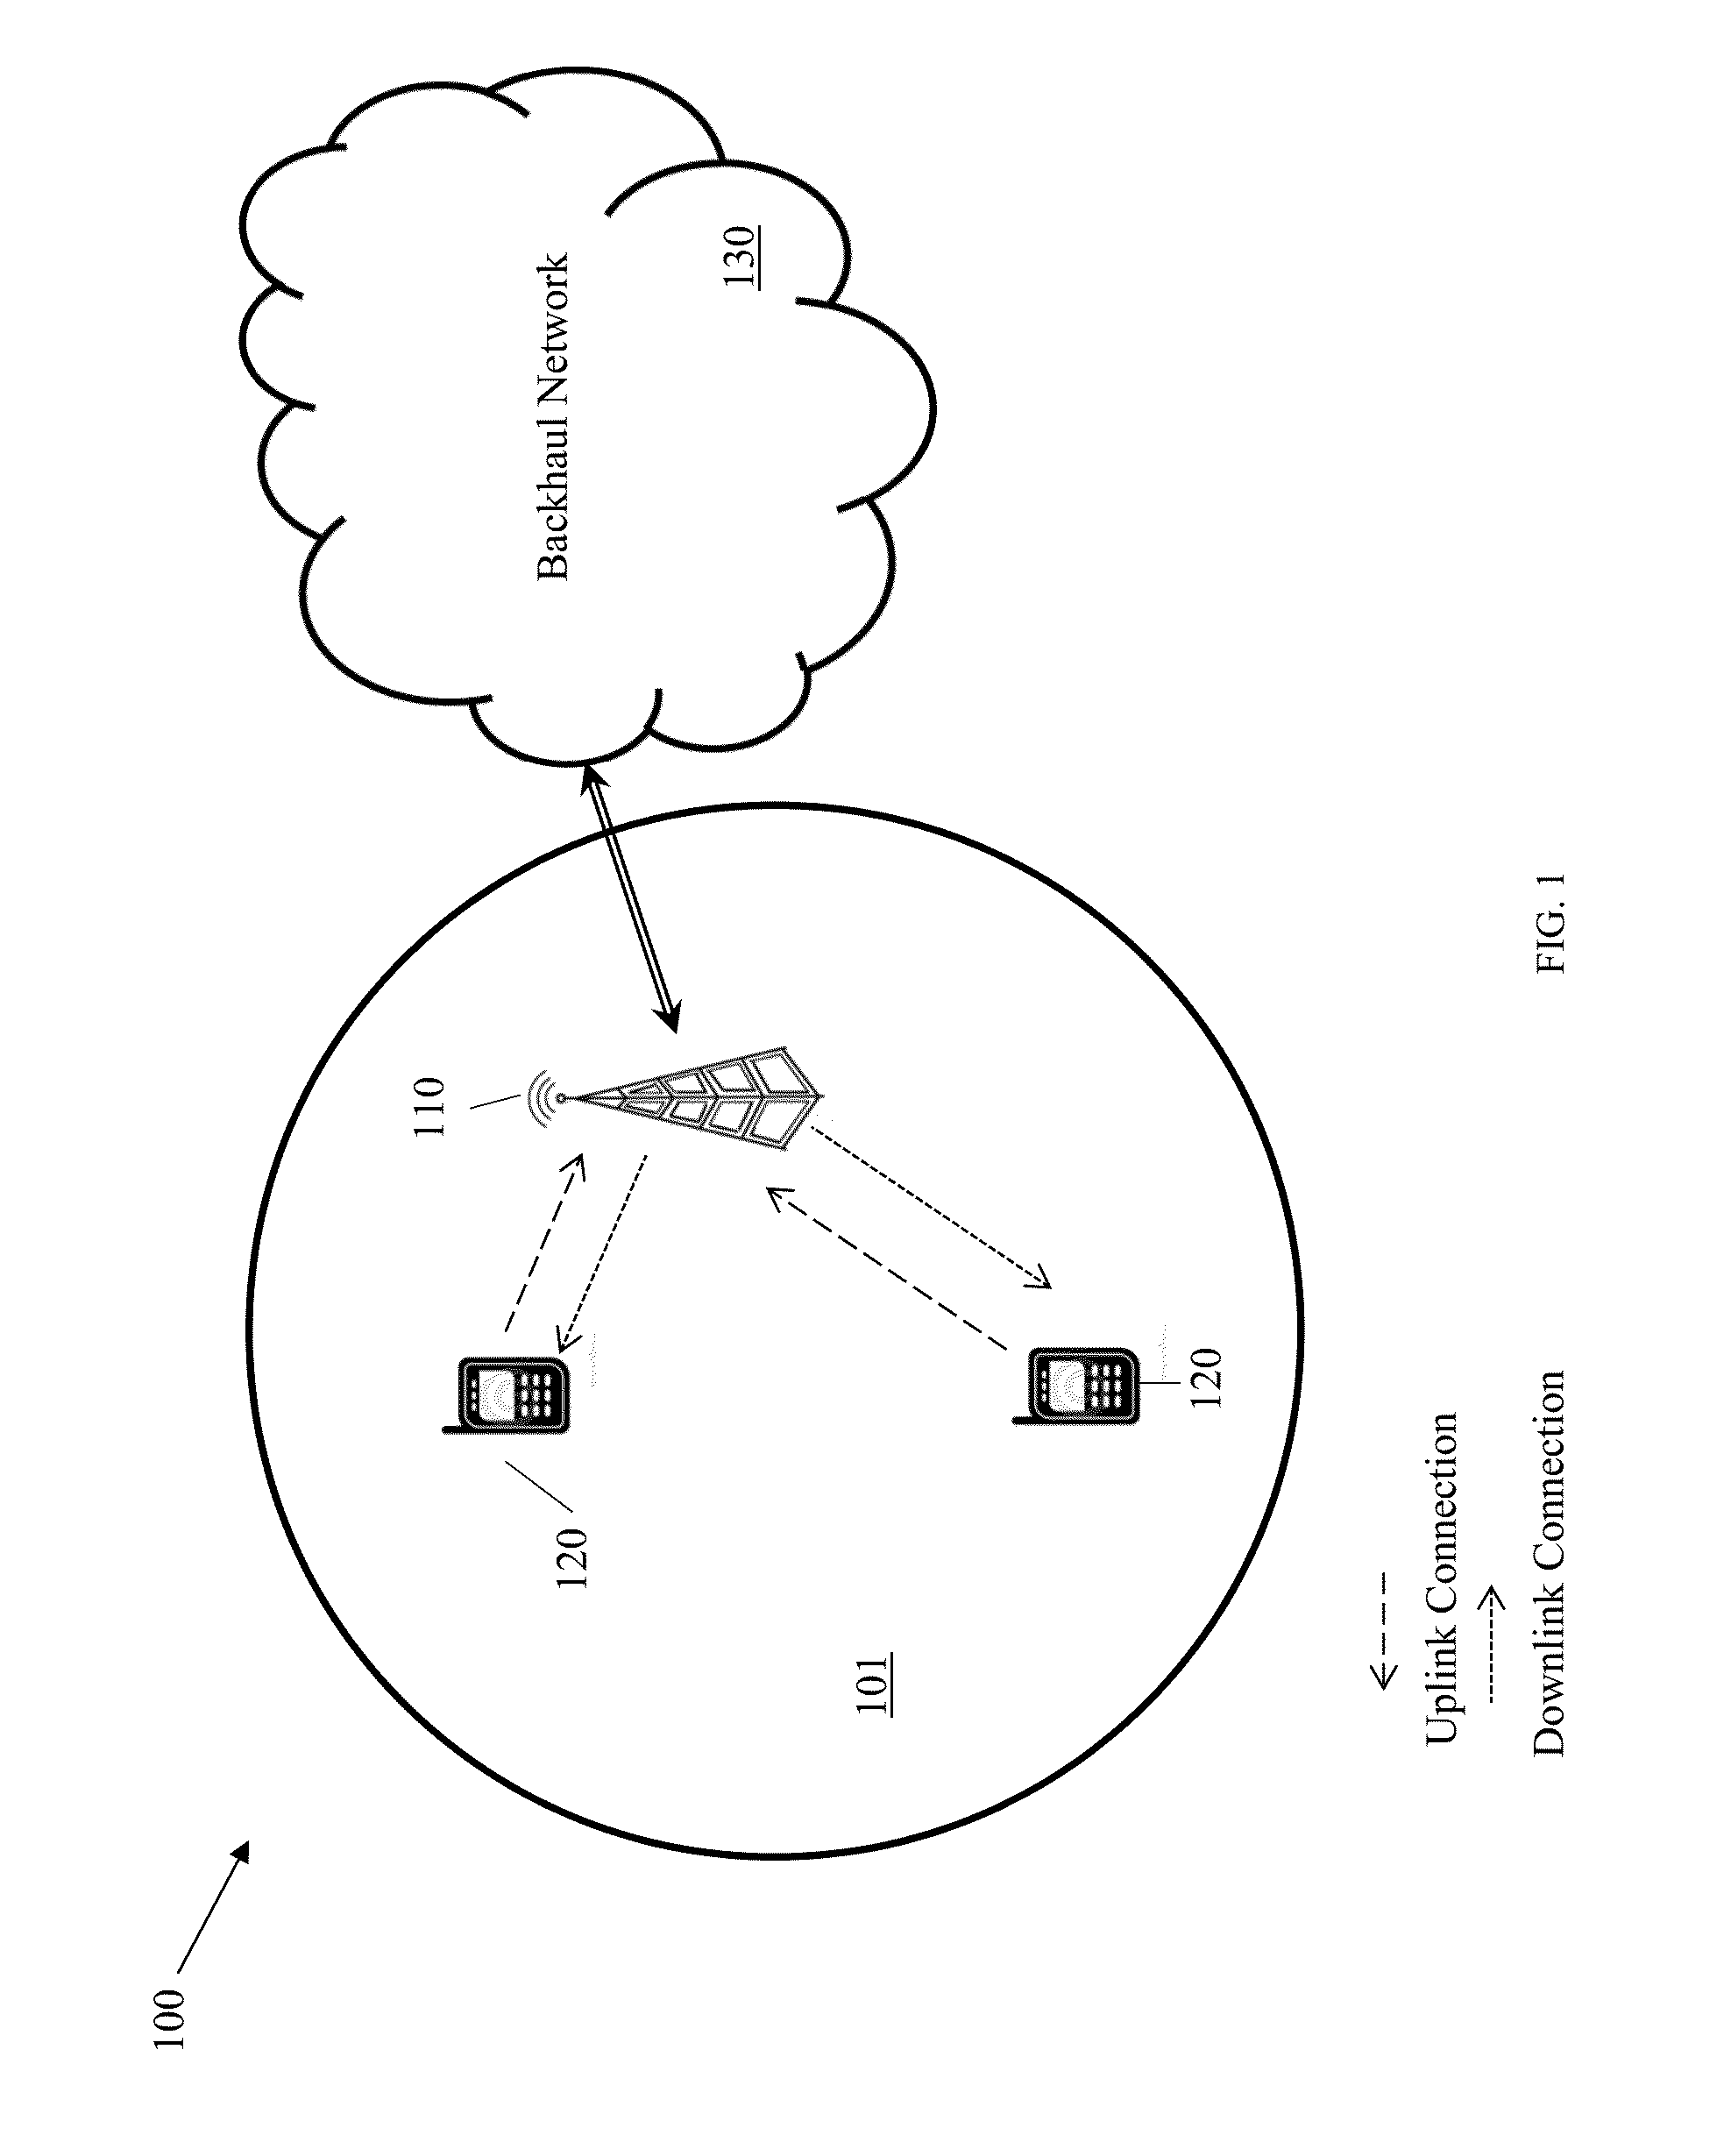 Systems and Methods for OFDM with Flexible Sub-Carrier Spacing and Symbol Duration